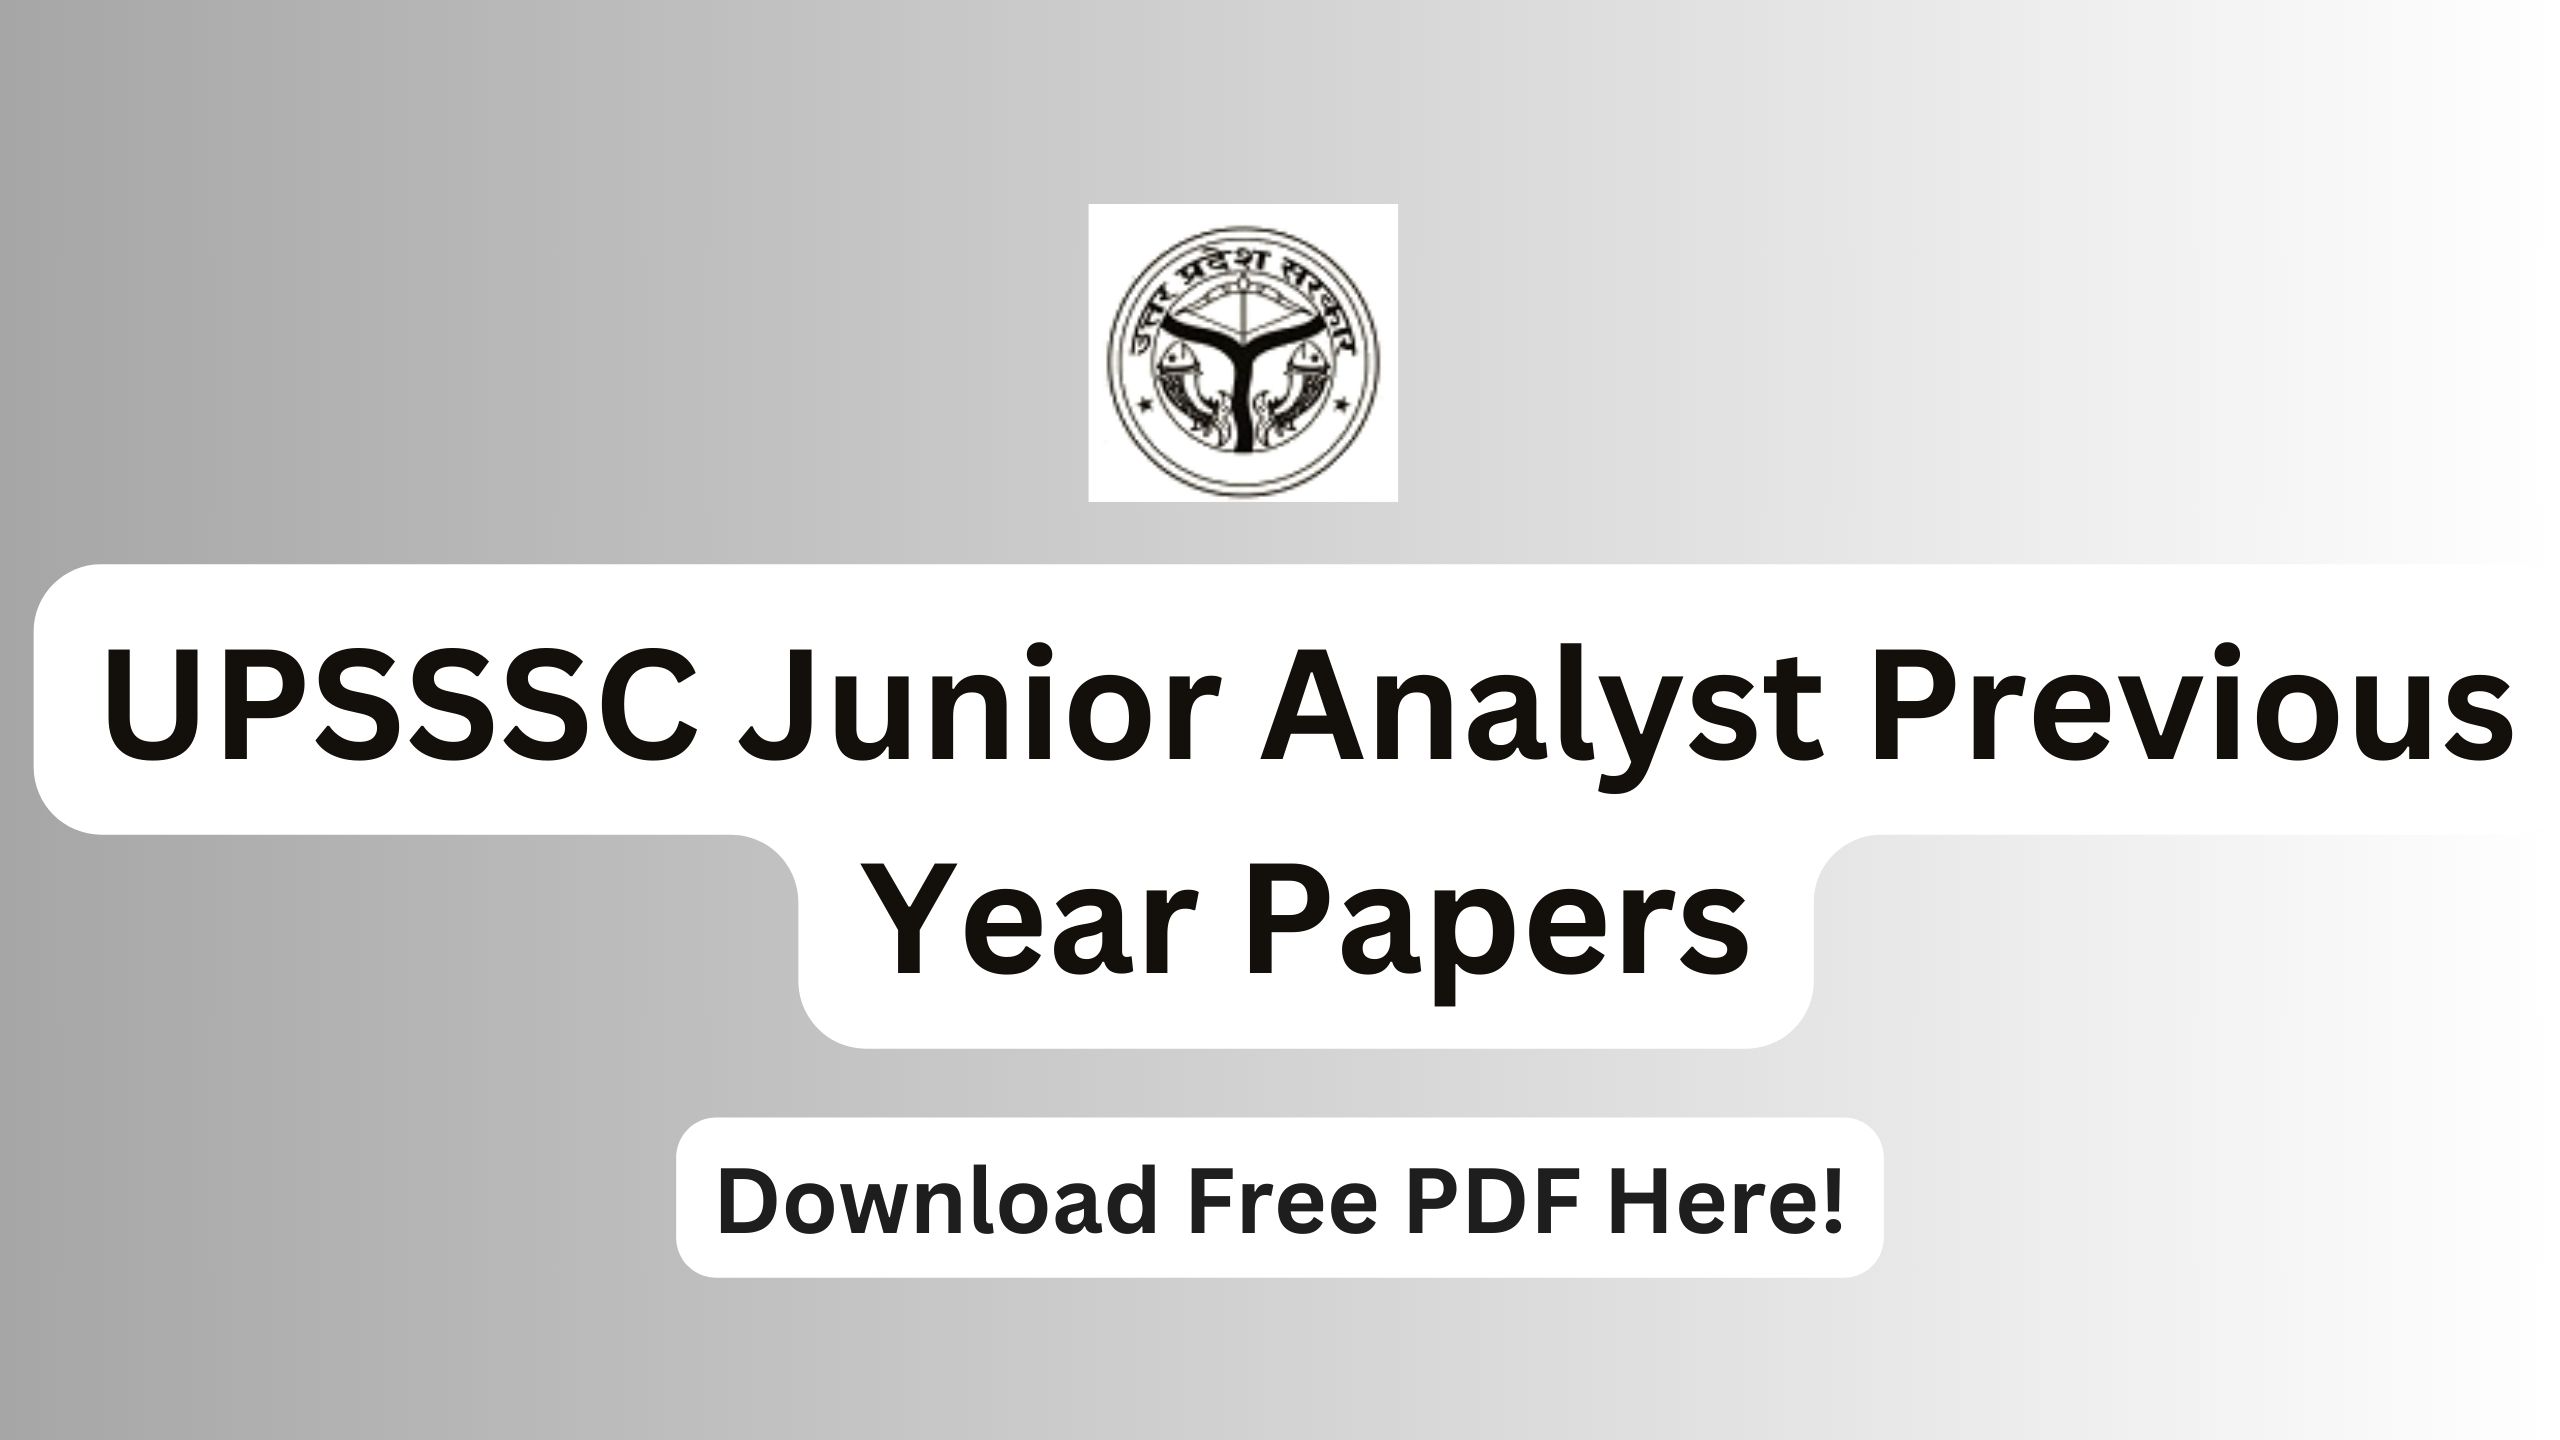 UPSSSC Junior Analyst Previous Year Papers, Download Old Paper!